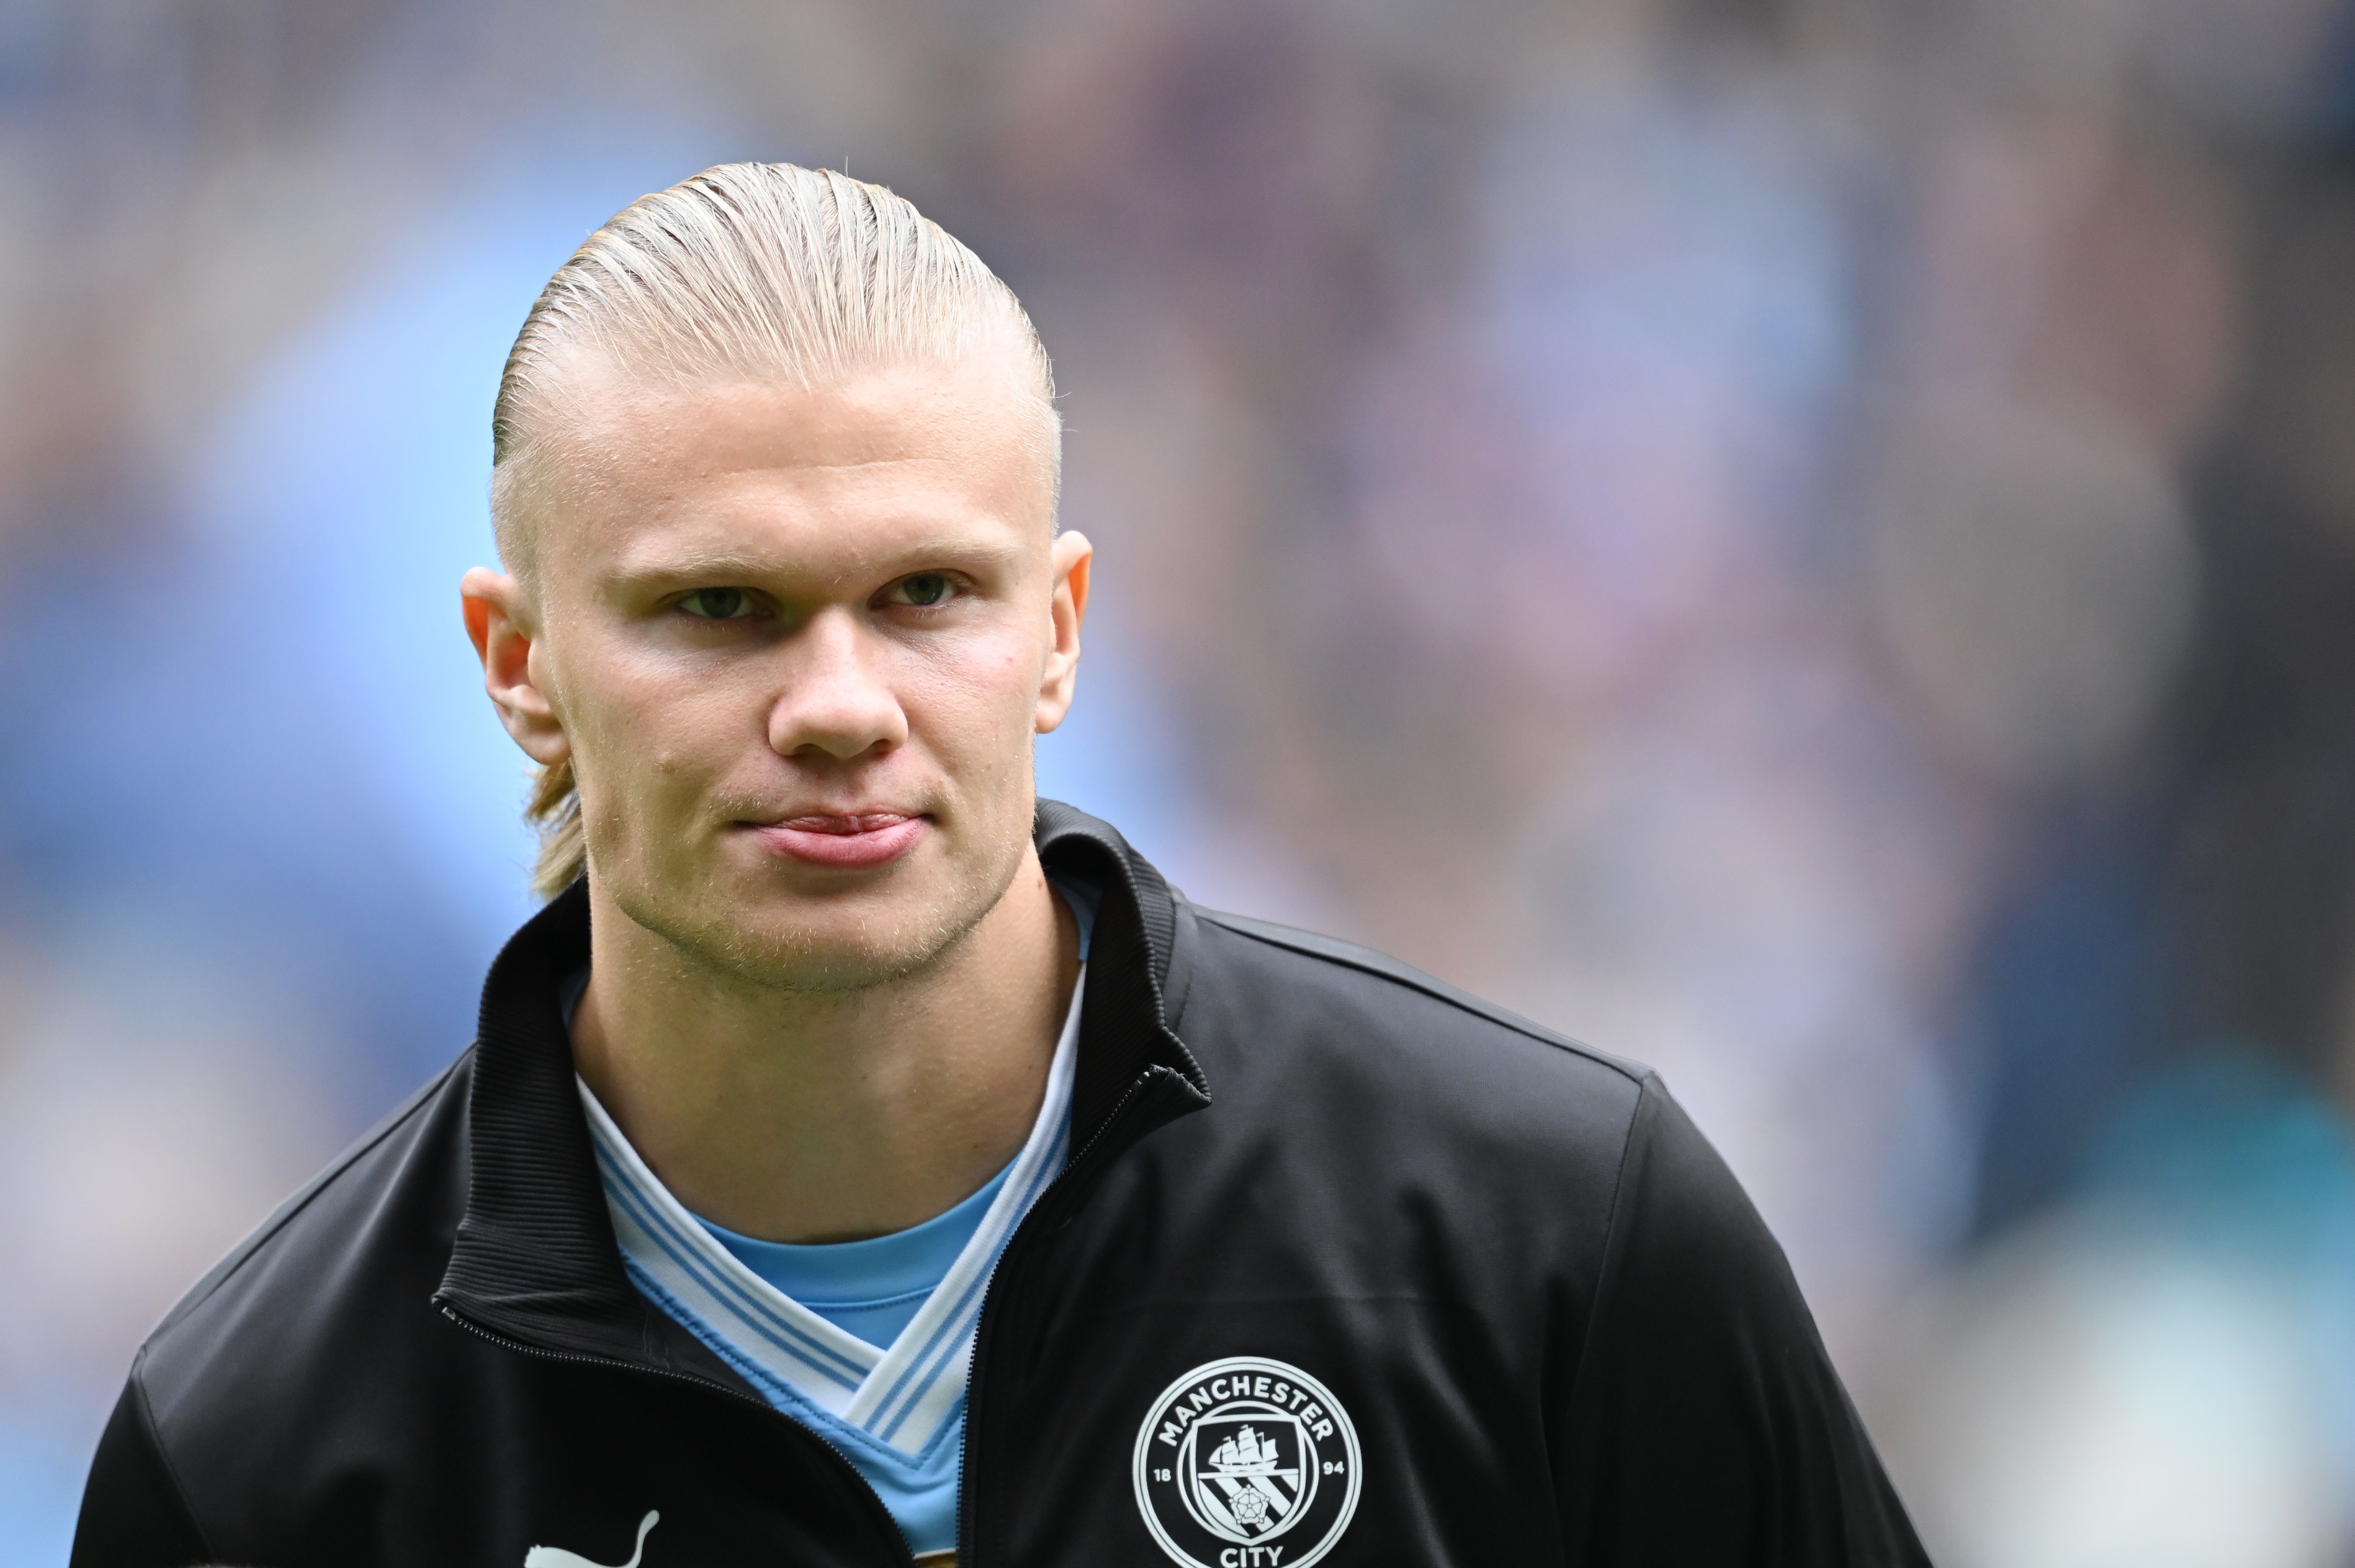 “That’s all I can say” – Erling Haaland shuts down contract talks at Man City amid Real Madrid links